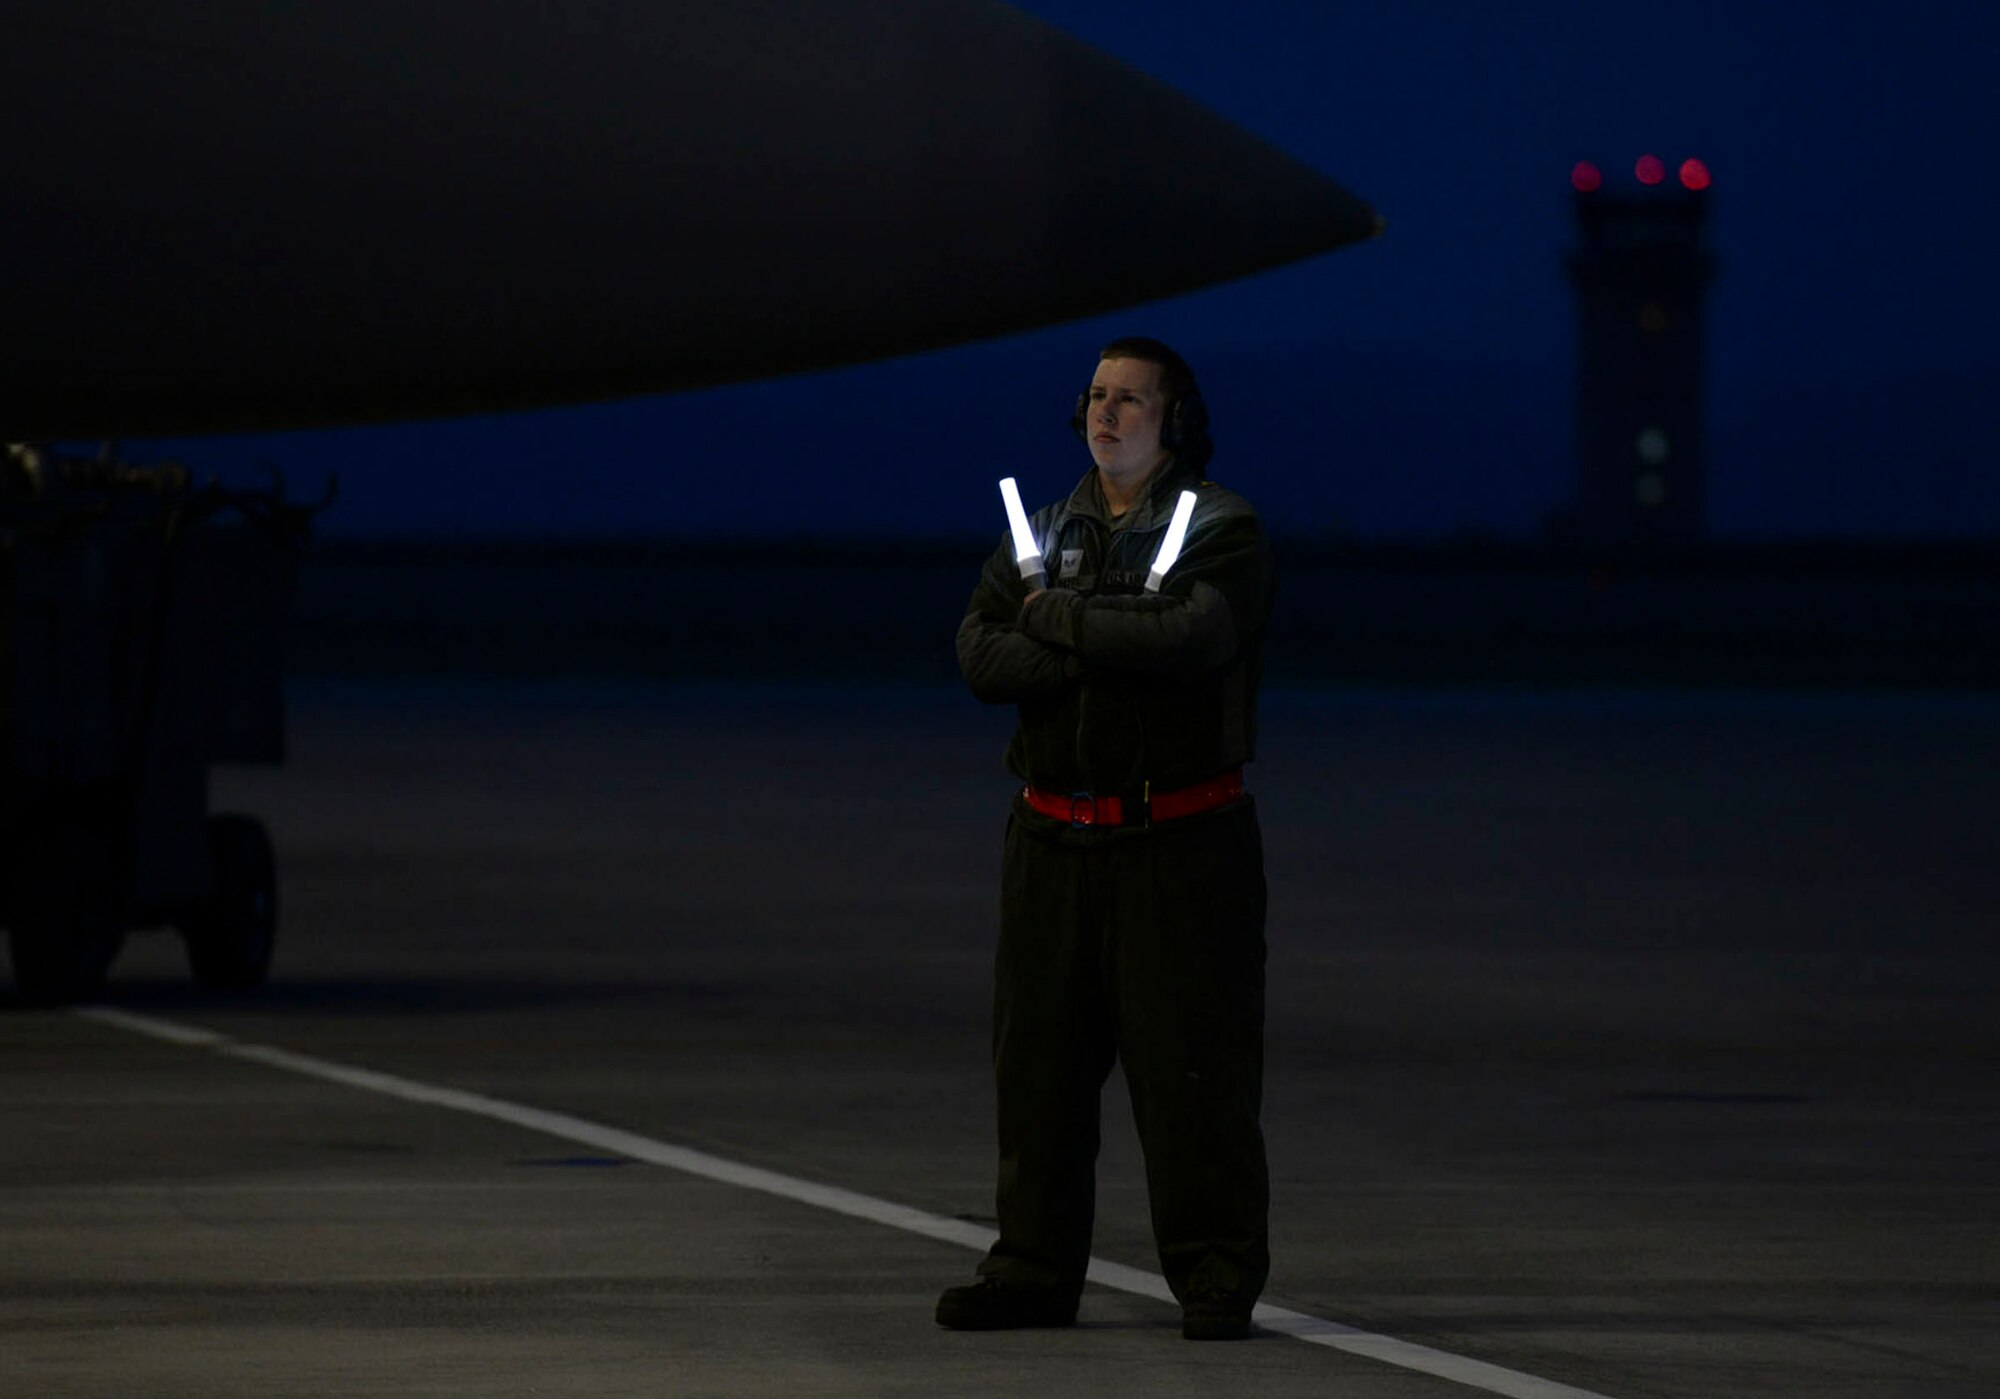 A crewchief waits to marshal an aircraft at Mountain Home Air Force Base, Idaho, March 15, 2016. The 366th Operations Group and 366th Maintenance Group conducted 24-hour operations during a 72-hour sortie surge. (U.S. Air Force photo by Airman 1st Class Jessica H. Evans/RELEASED)